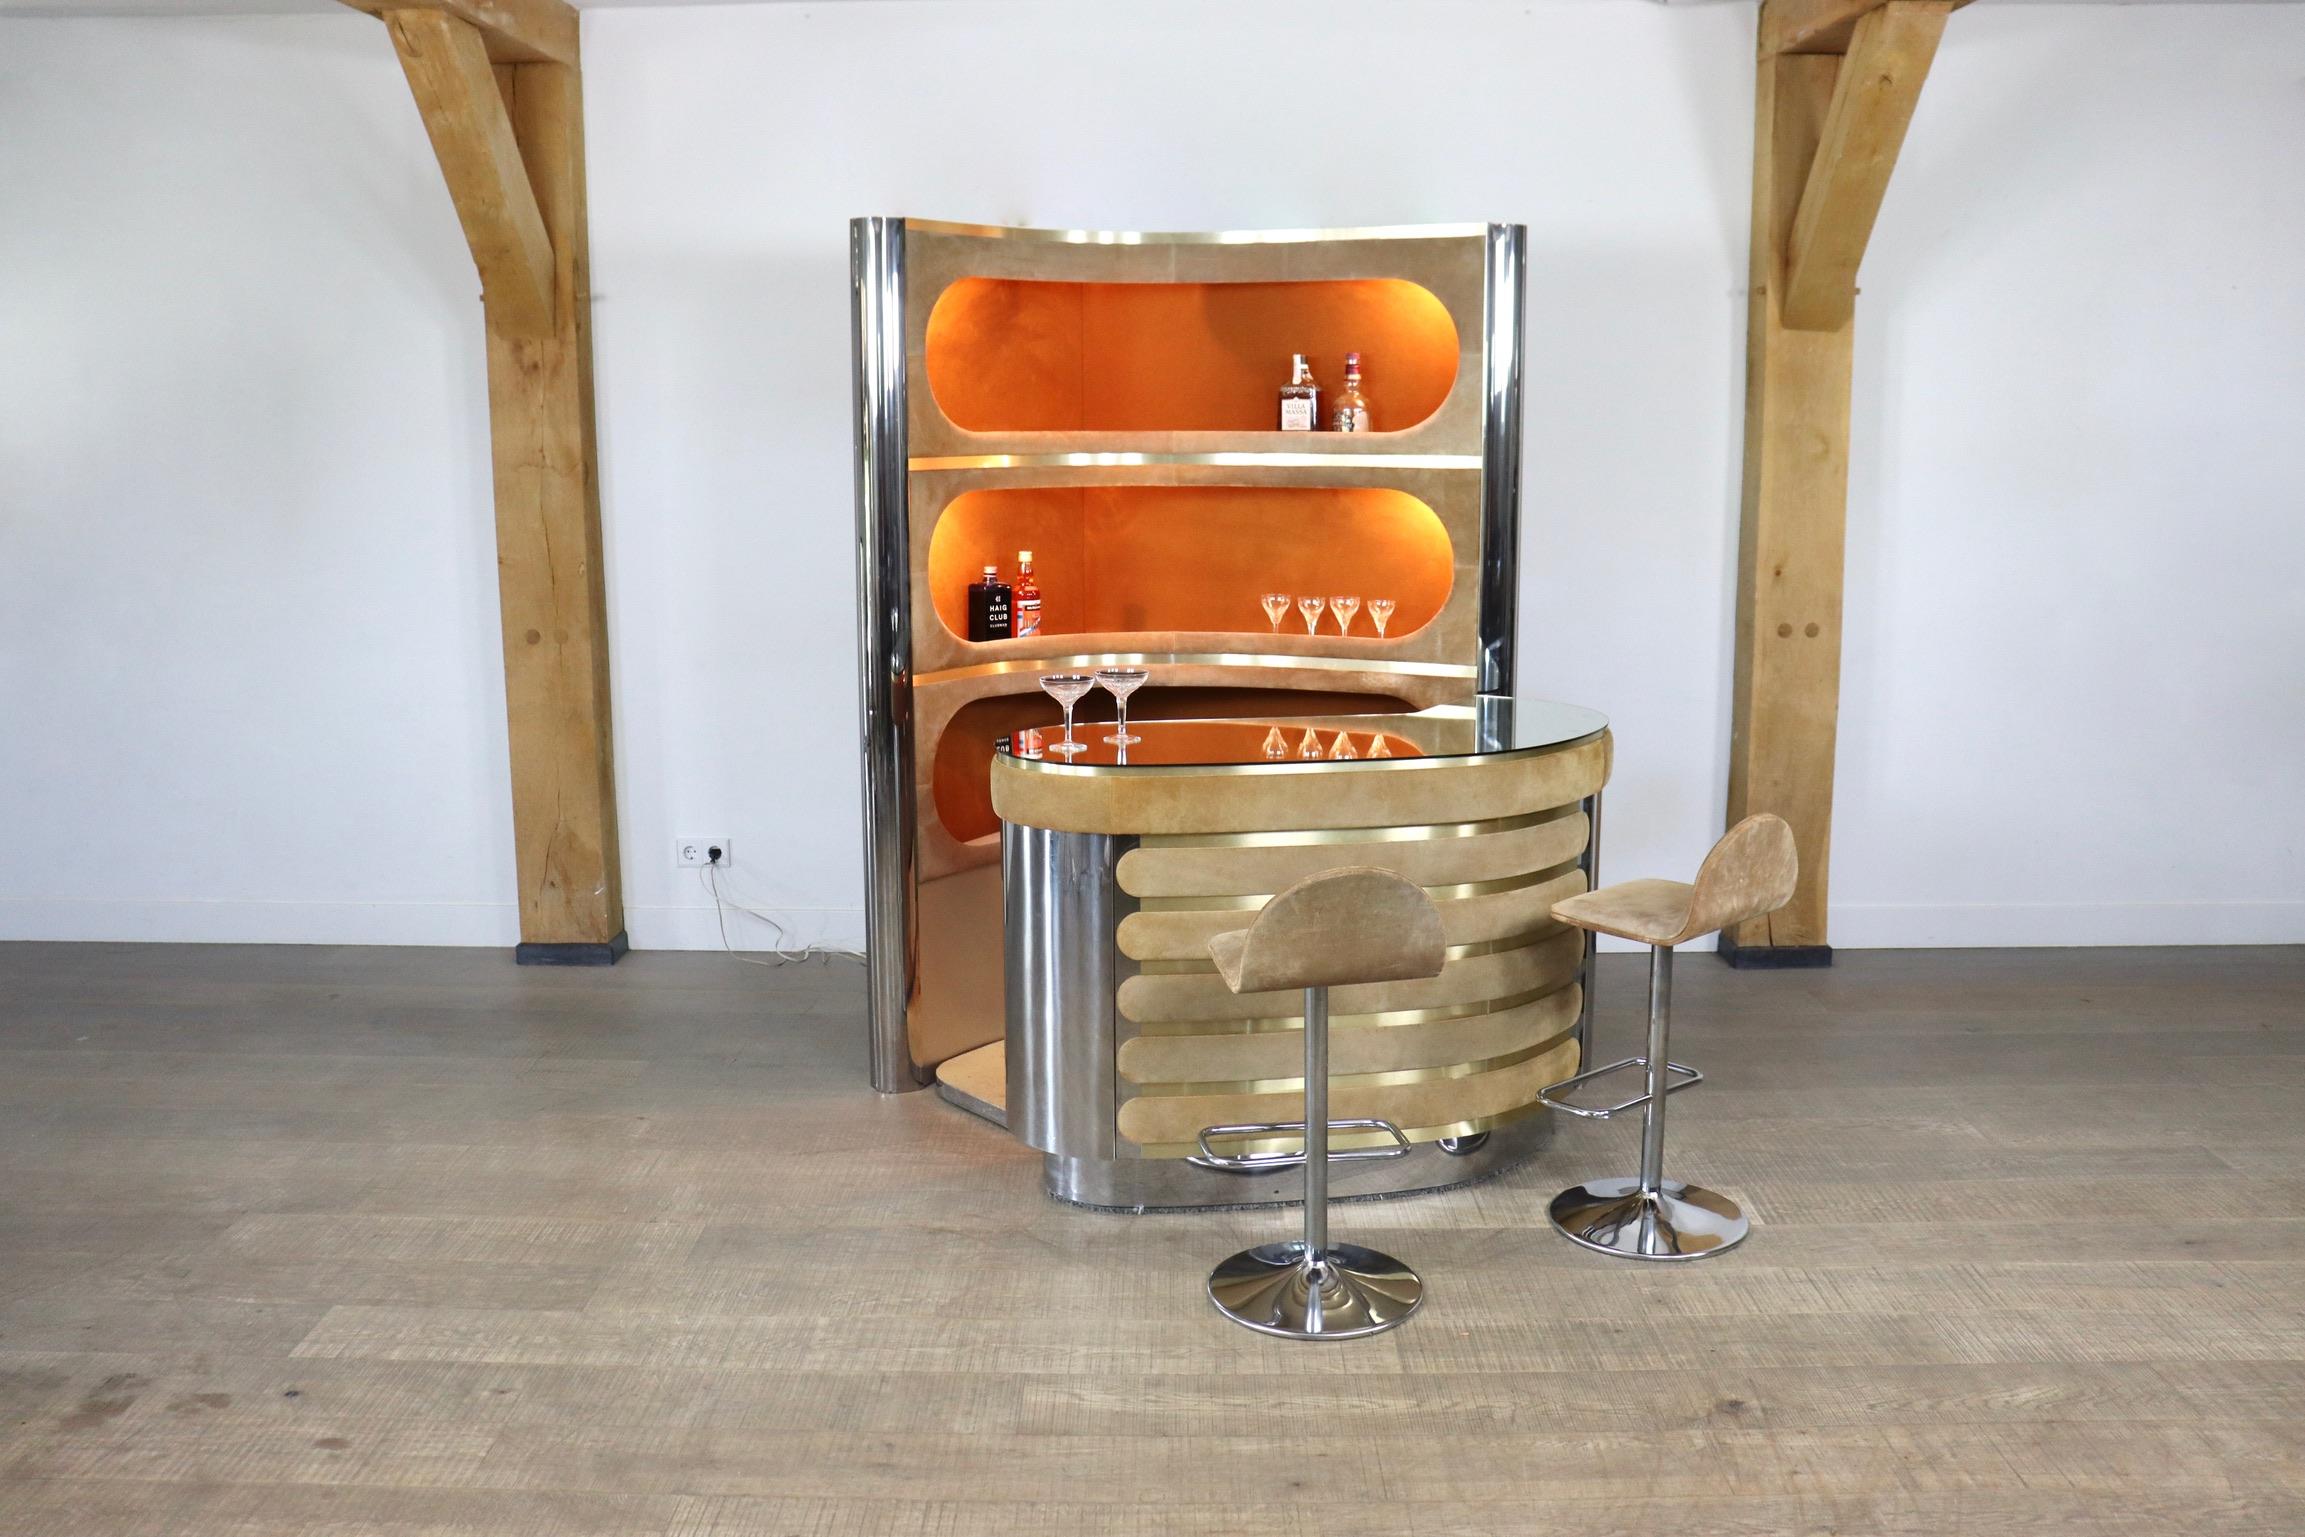 Incredible suede and chrome bar by Willy Rizzo 1970s. With original mirror counter, working lights, original refrigerator and two barstools. With this bar, any room will be elevated to a classy and luxurious space. Pour yourself a cold drink and